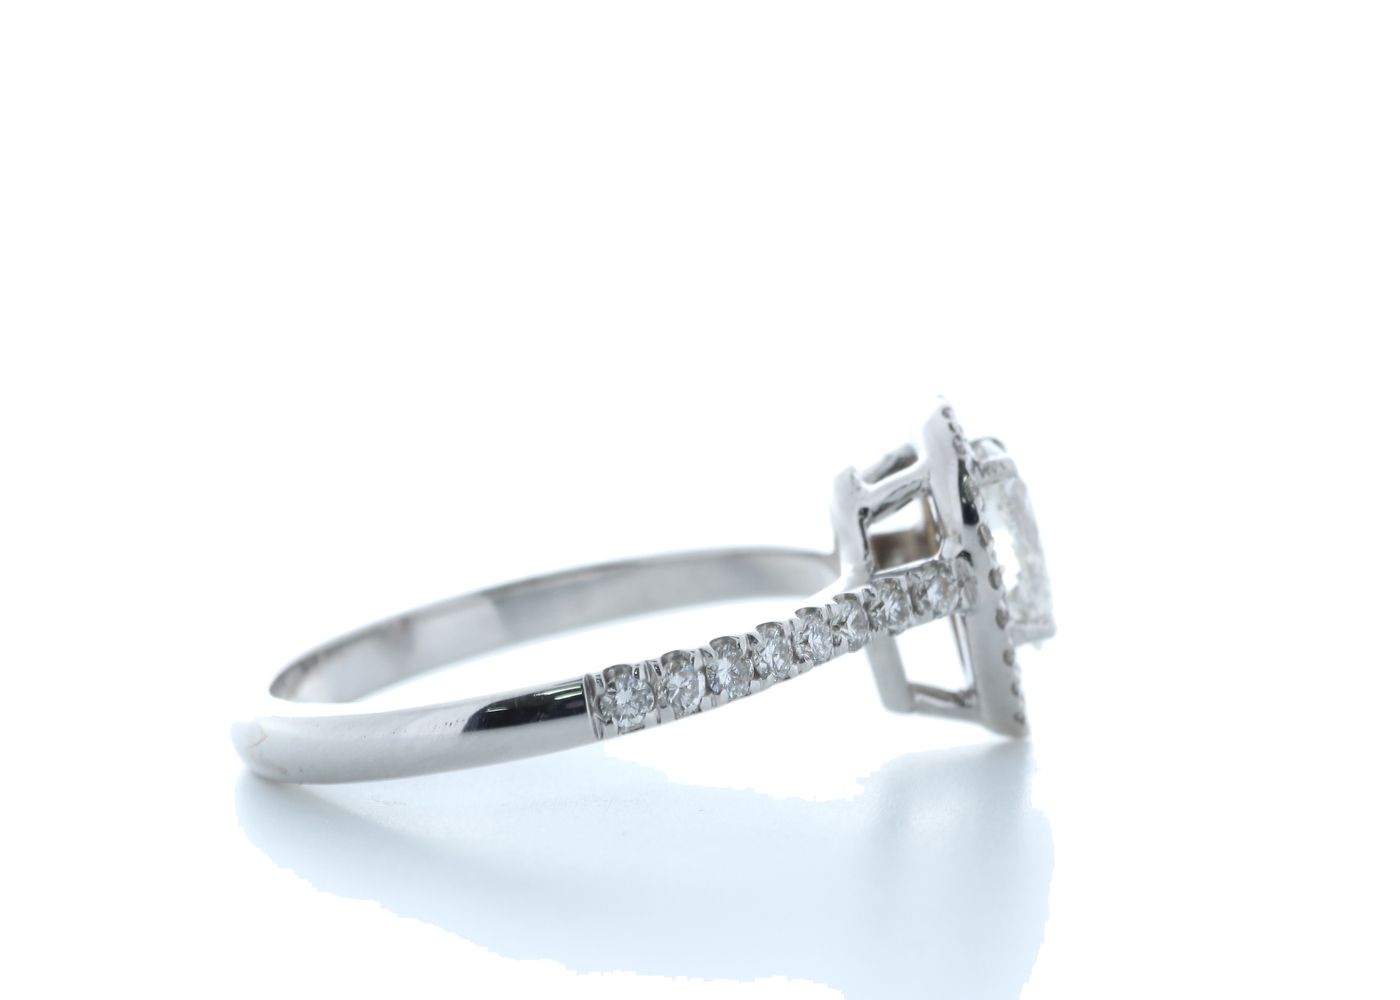 18ct White Gold Single Stone With Halo Setting Ring 0.91 (0.51) Carats - Image 4 of 5